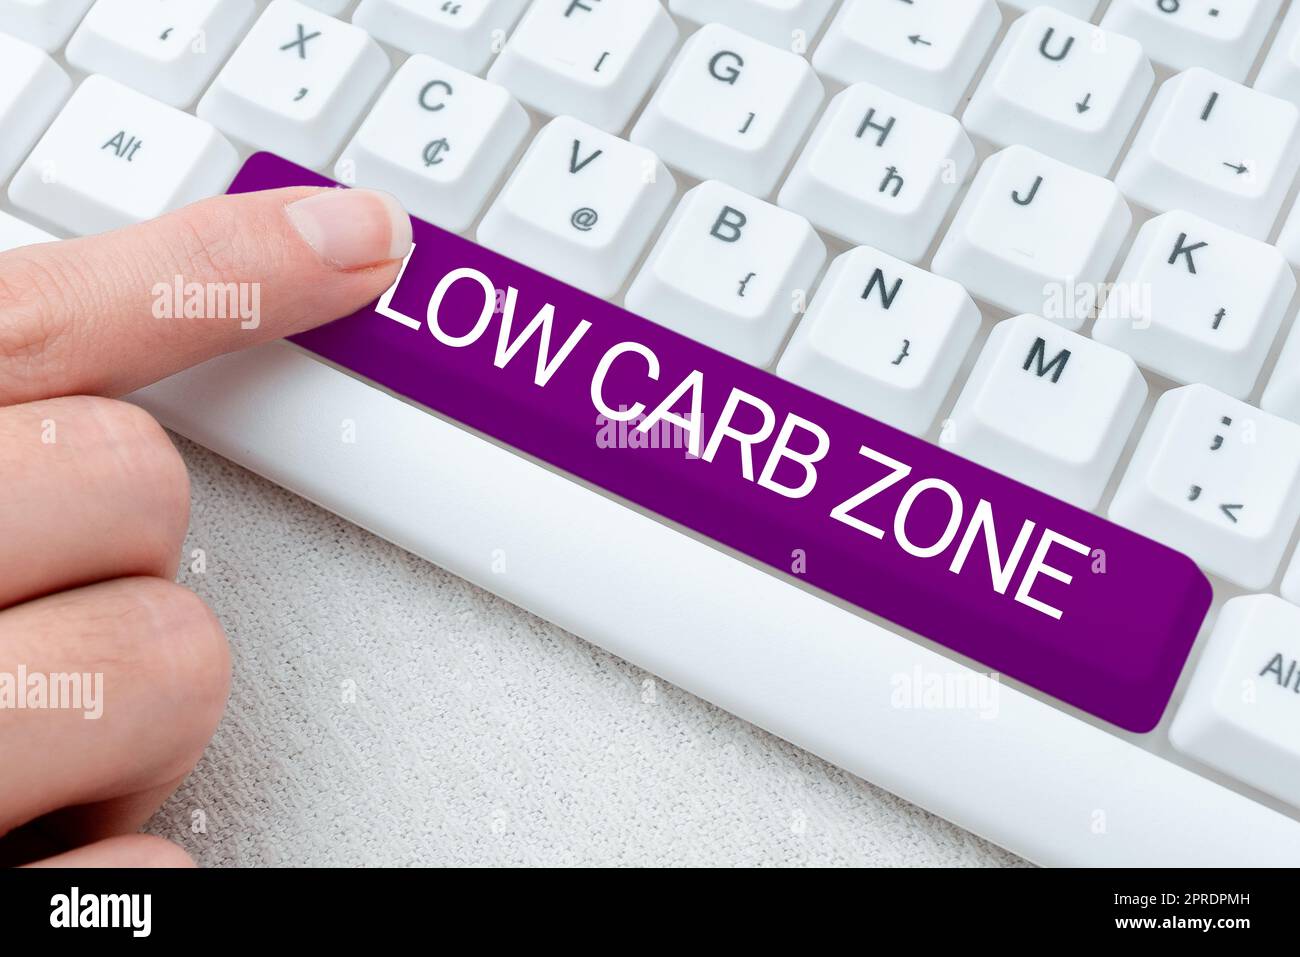 Text showing inspiration Low Carb Zone. Internet Concept Healthy diet for losing weight eating more proteins sugar free -48918 Stock Photo